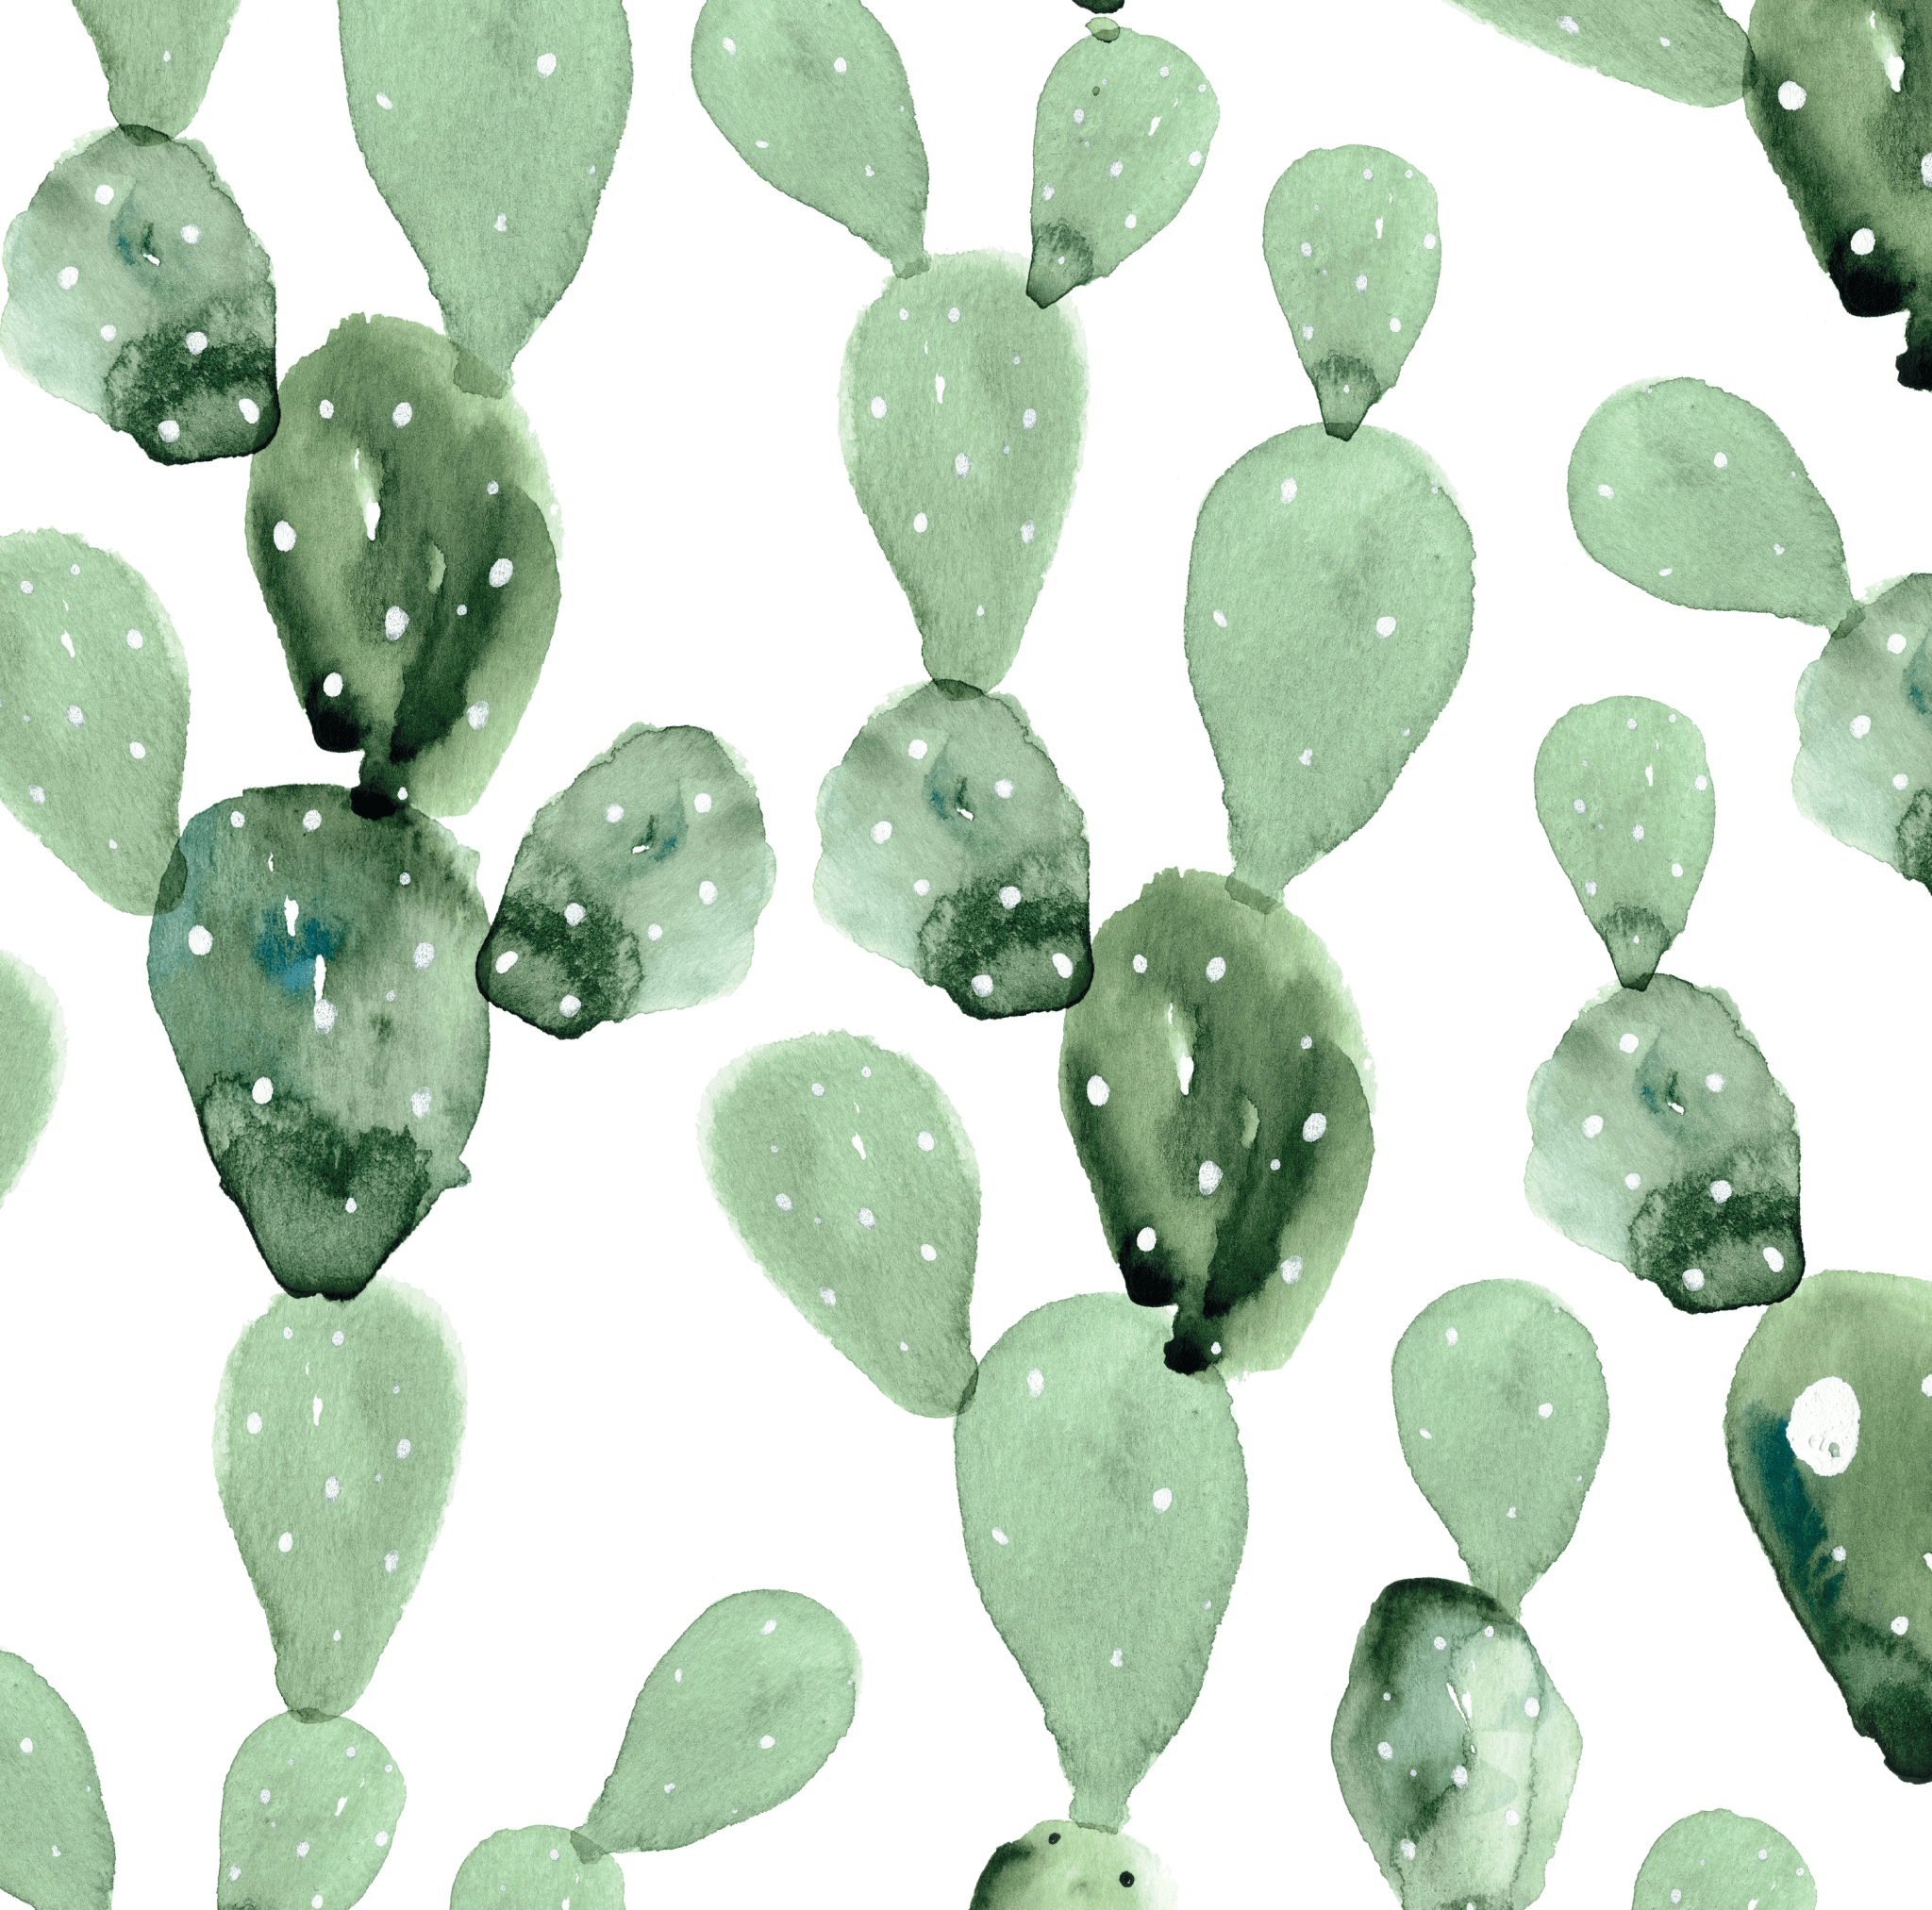 cactus wallpaper, removable peel and stick wallpaper, wall paper, wall paper peel and stick, wallpapers peel and stick